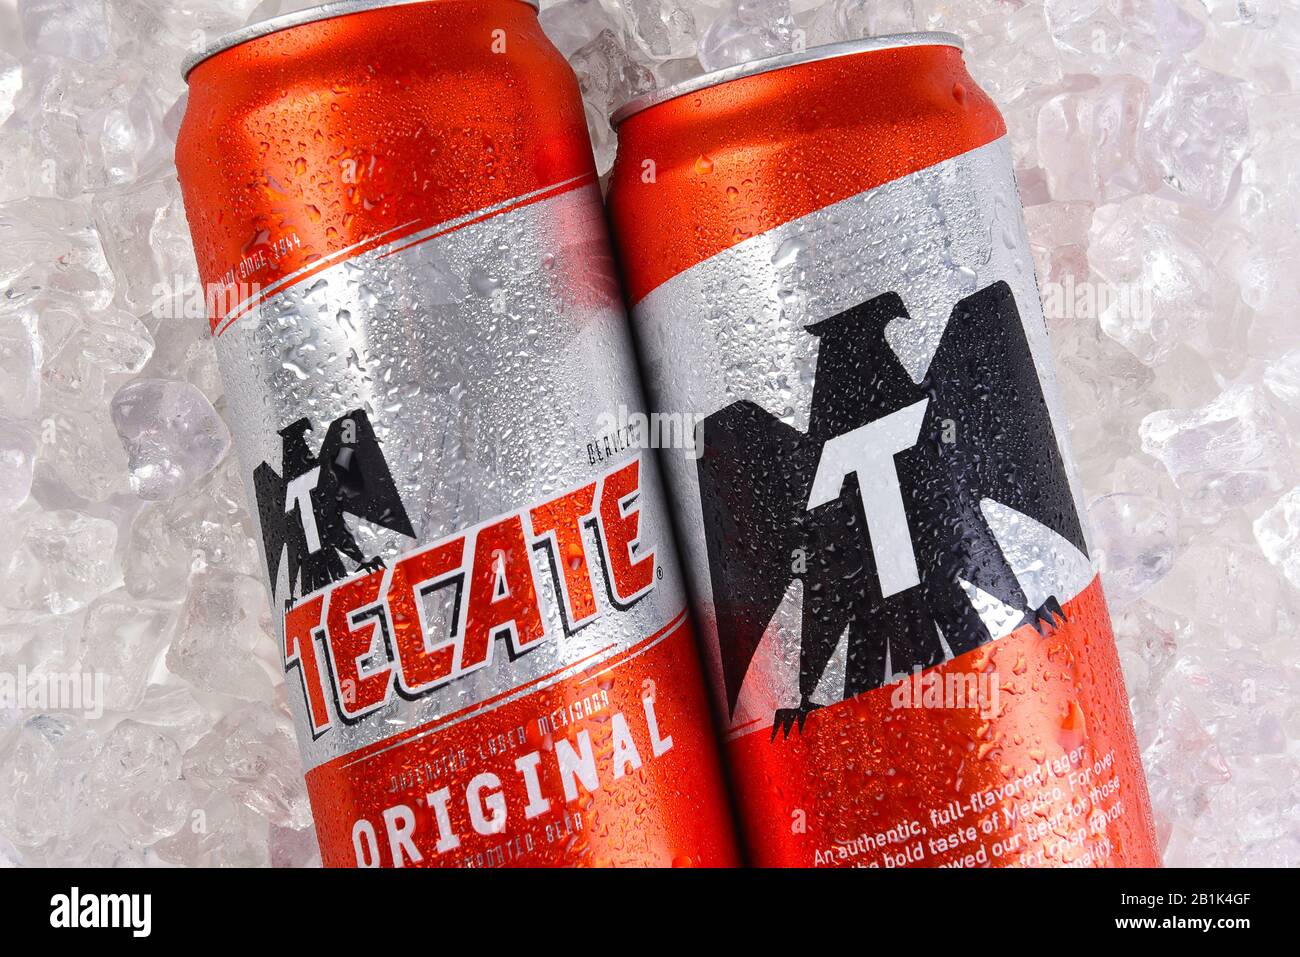 IRVINE, CALIFORNIA - MARCH 21, 2018: Two Tecate Original Cerveza cans on ice closeup. Cuauhtemoc Moctezuma Brewery is a major brewer based in Monterre Stock Photo